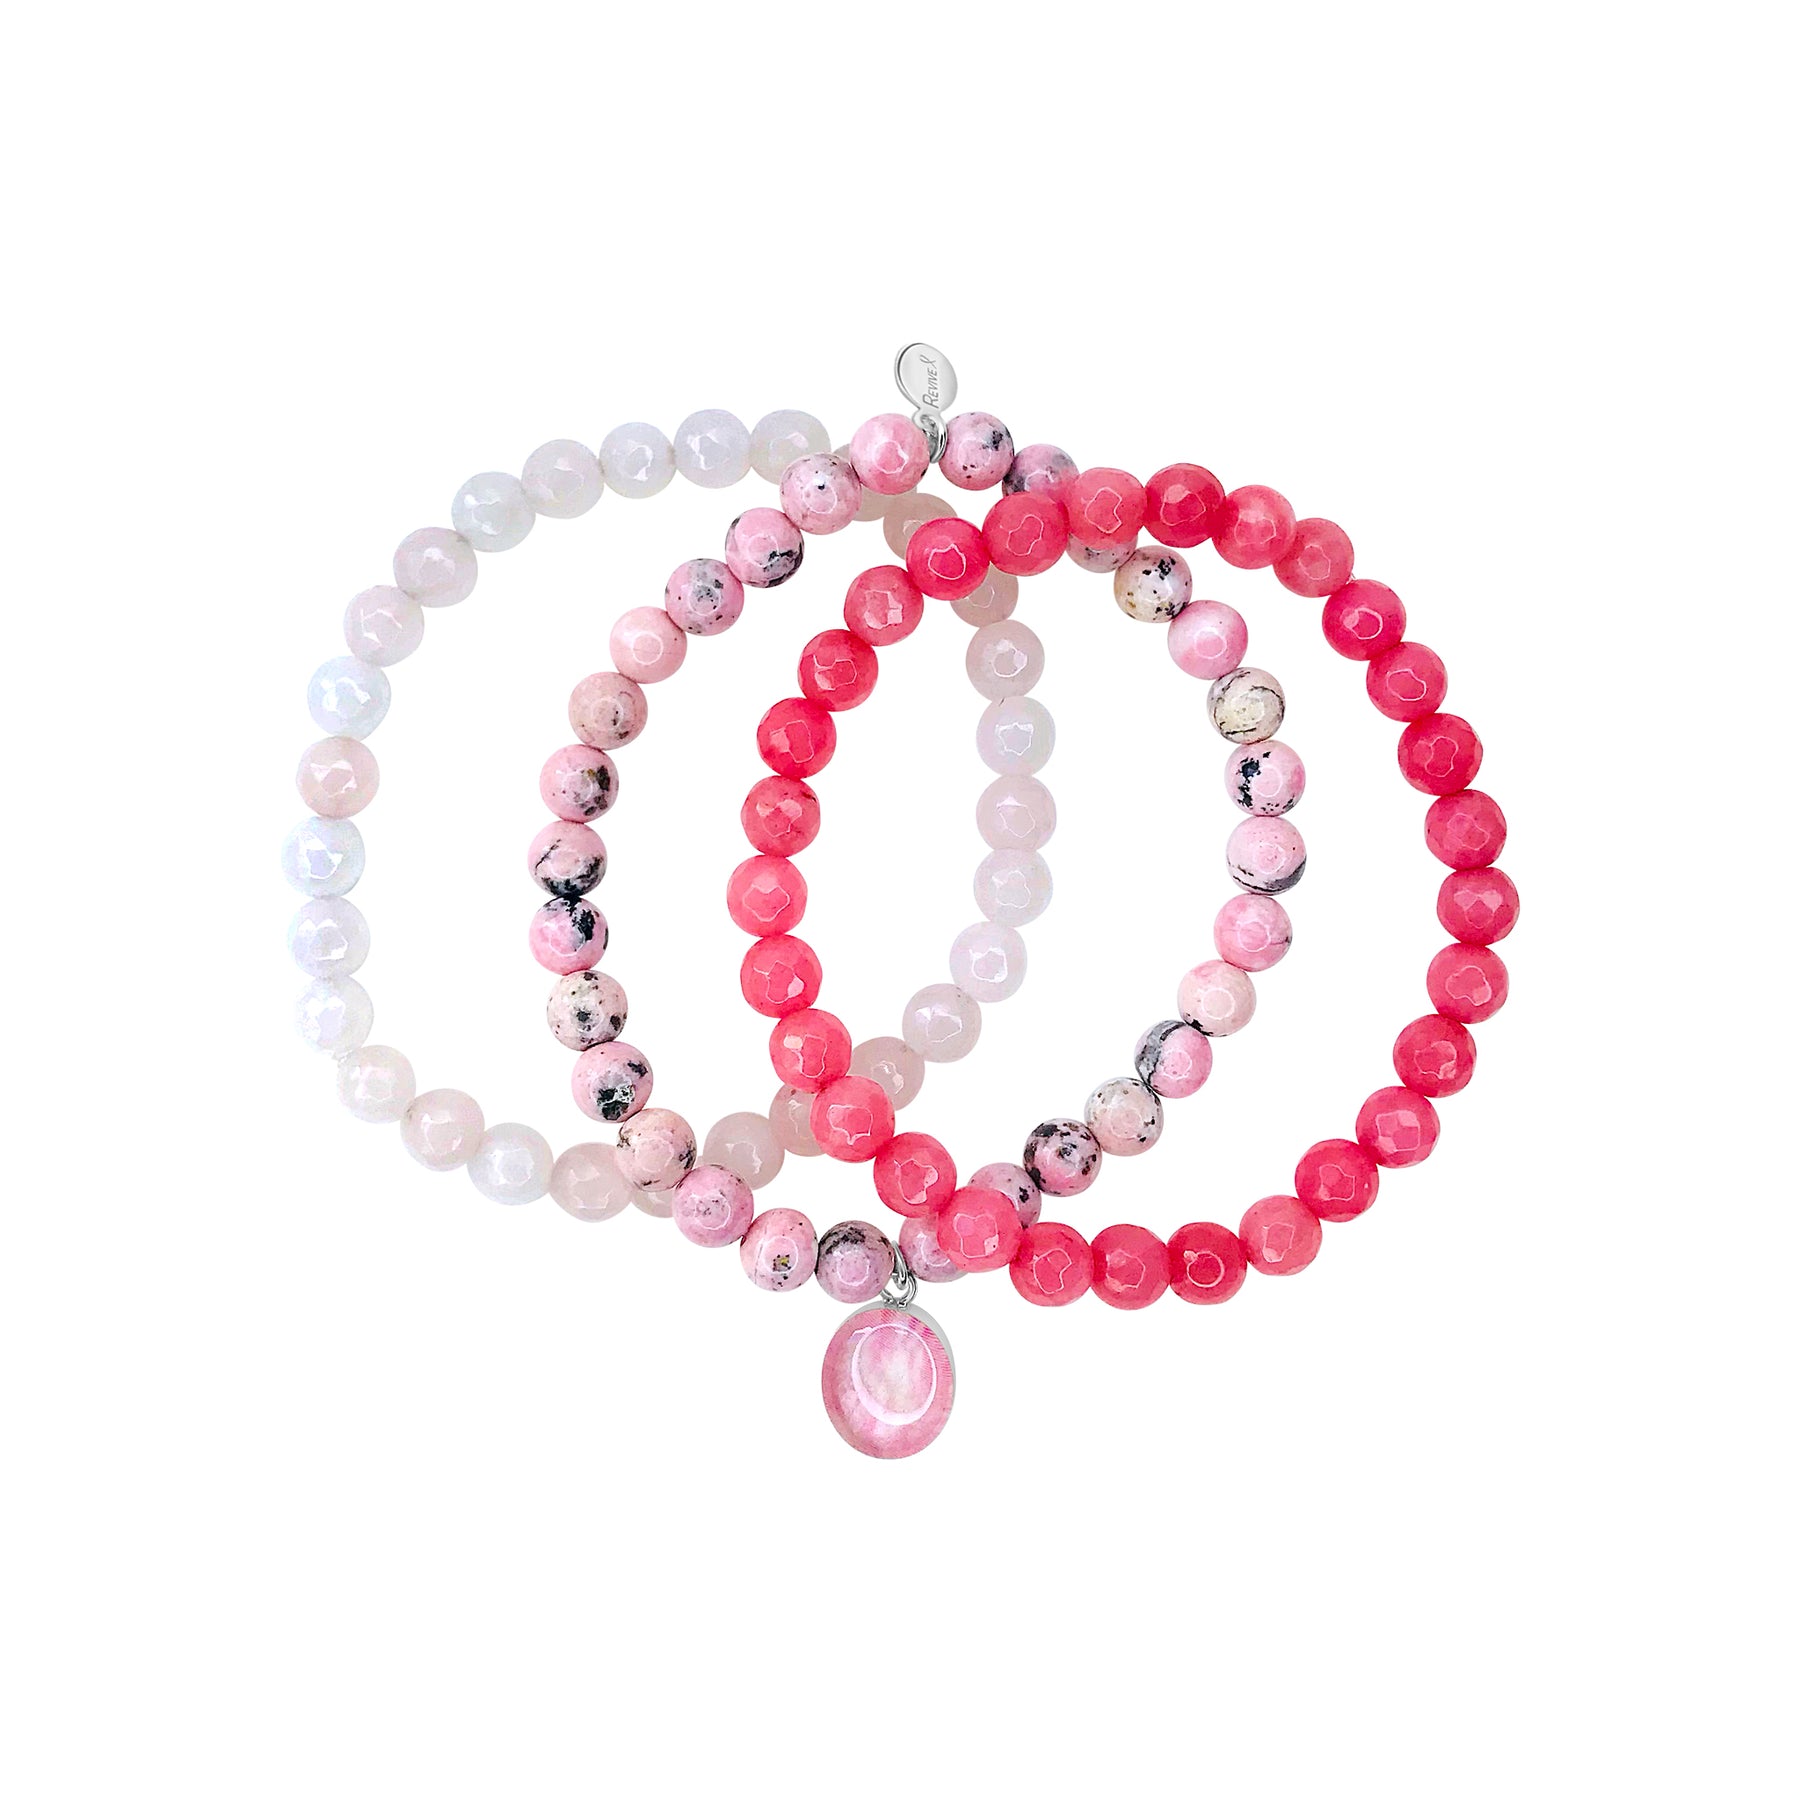 Buy Breast Cancer Pink Ribbon Rope Bracelets for Awareness, Fundraising,  Gift Giving, Events Bulk Quantities Available Online in India - Etsy